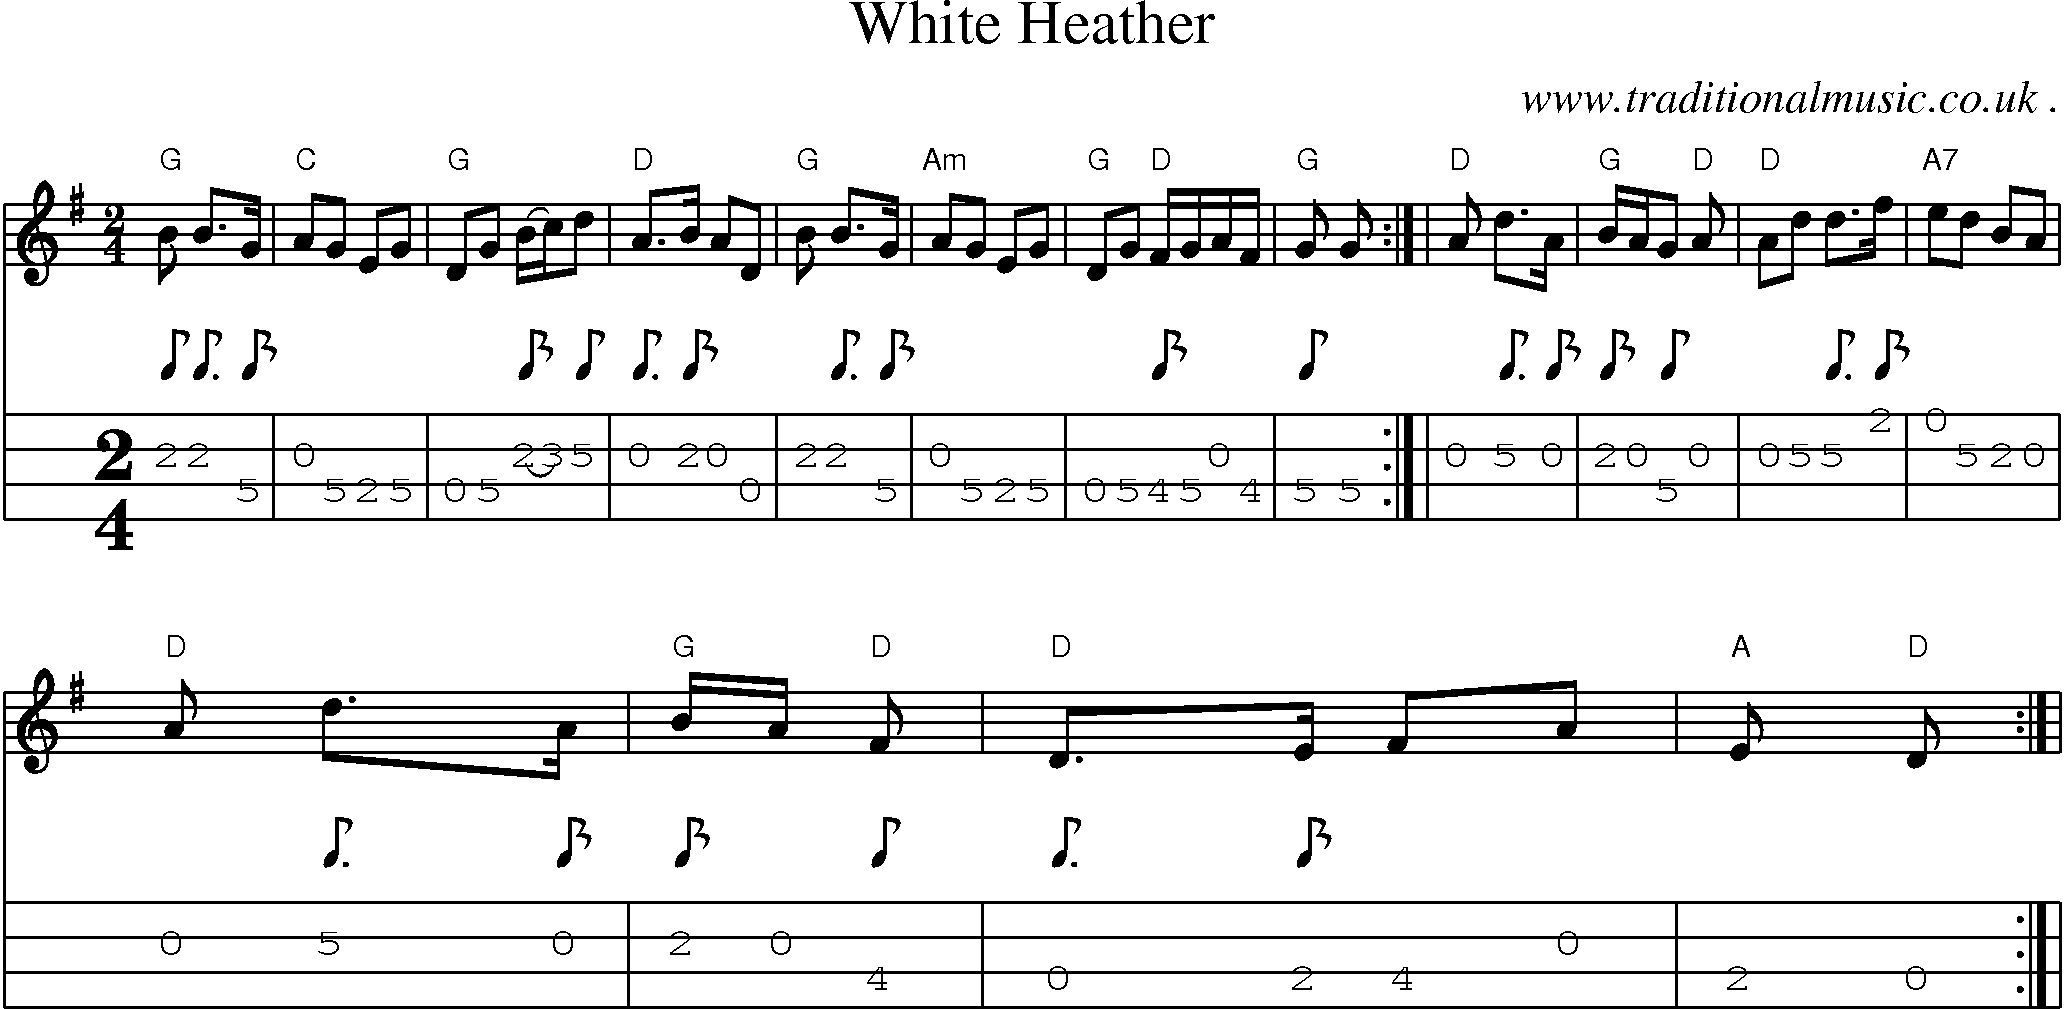 Sheet-music  score, Chords and Mandolin Tabs for White Heather